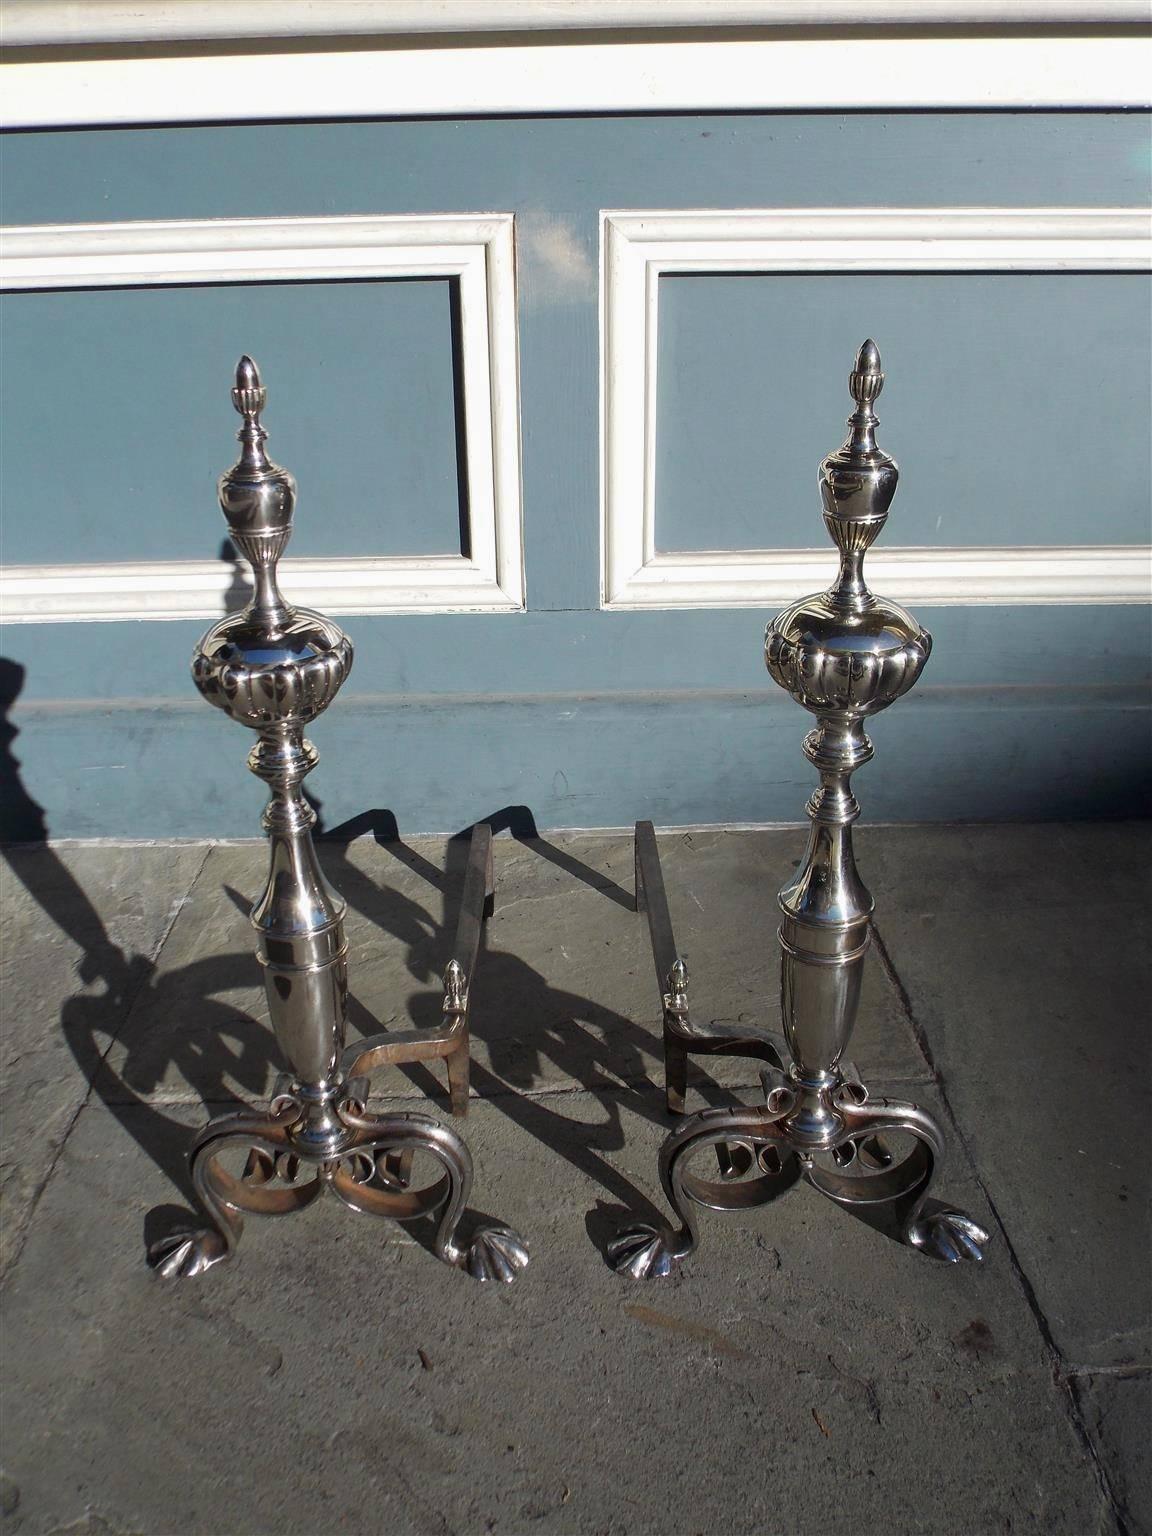 English nickel silver and wrought iron andirons with urn fluted acorn finial tops, bulbous turned ringed plinths, matching acorn finial log stops, decorative scrolled legs, and terminating on stylized lions paw feet. Late 18th Century